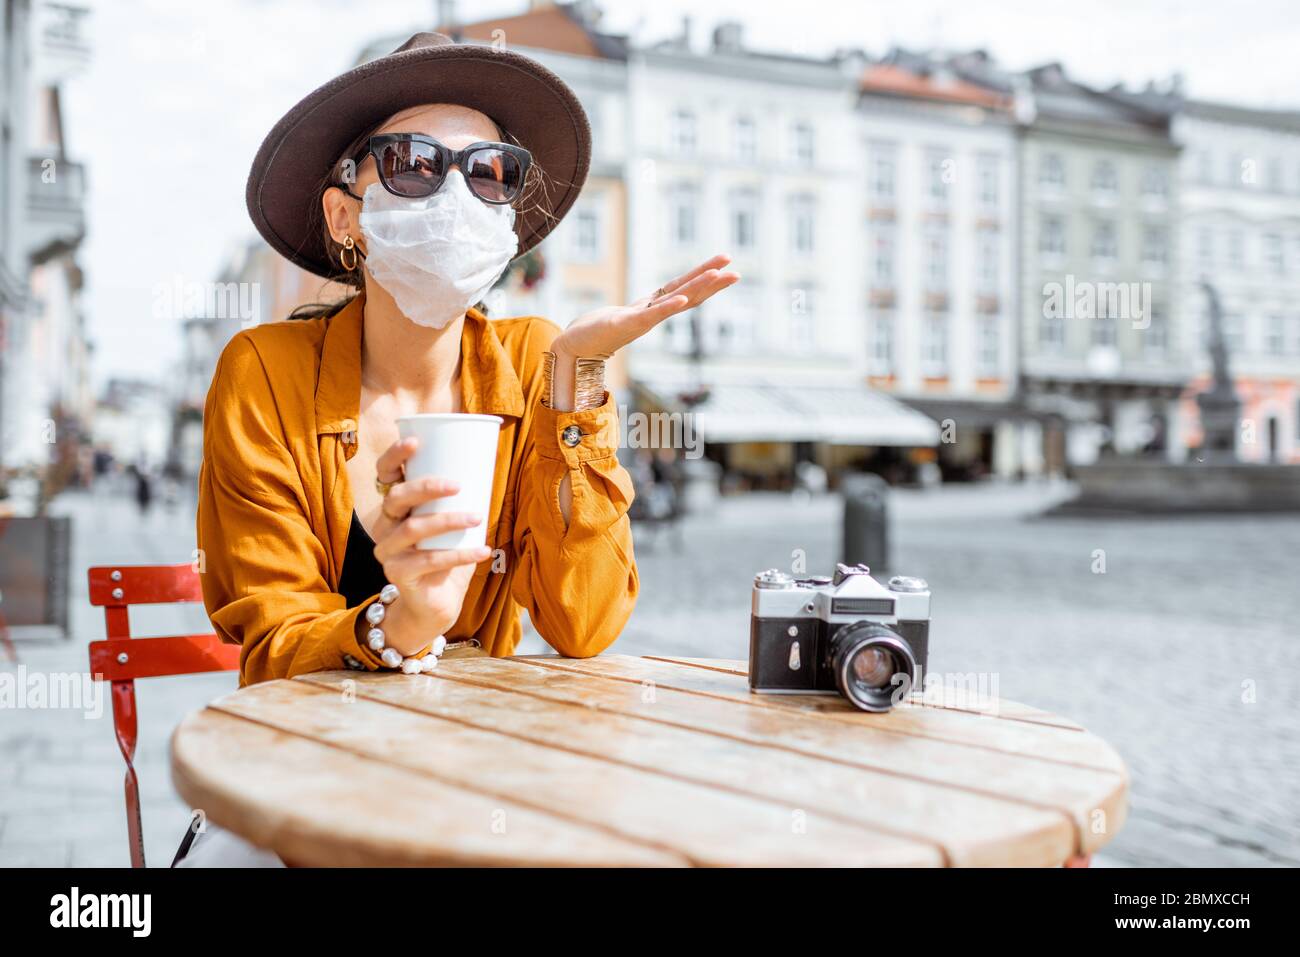 Despaired woman in facial mask sitting on the cafe terrace alone. Concept of social distancing and new social rules after coronavirus pandemic. Stock Photo